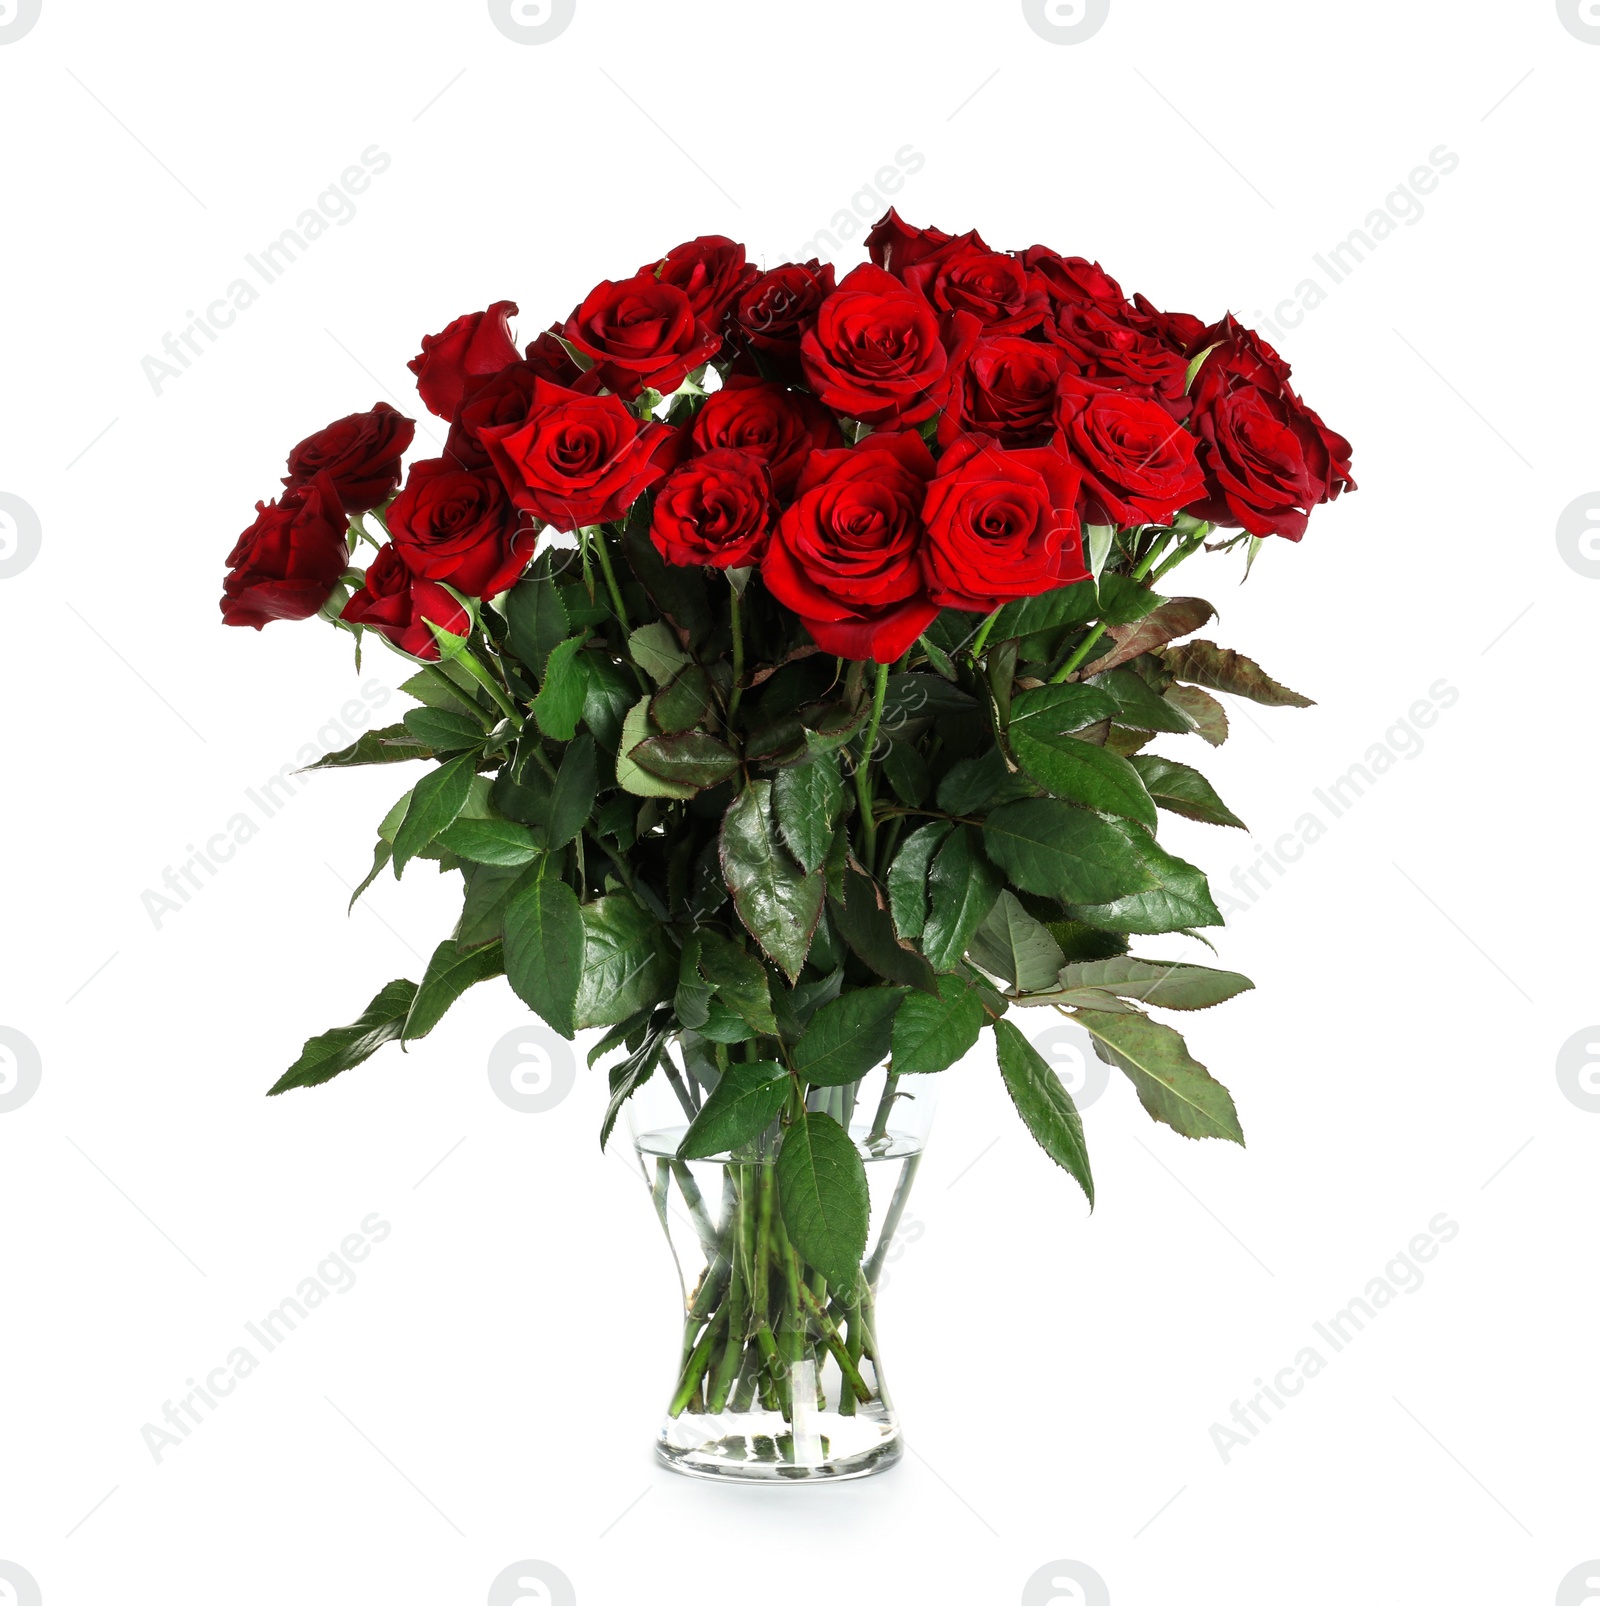 Photo of Vase with beautiful red roses on white background